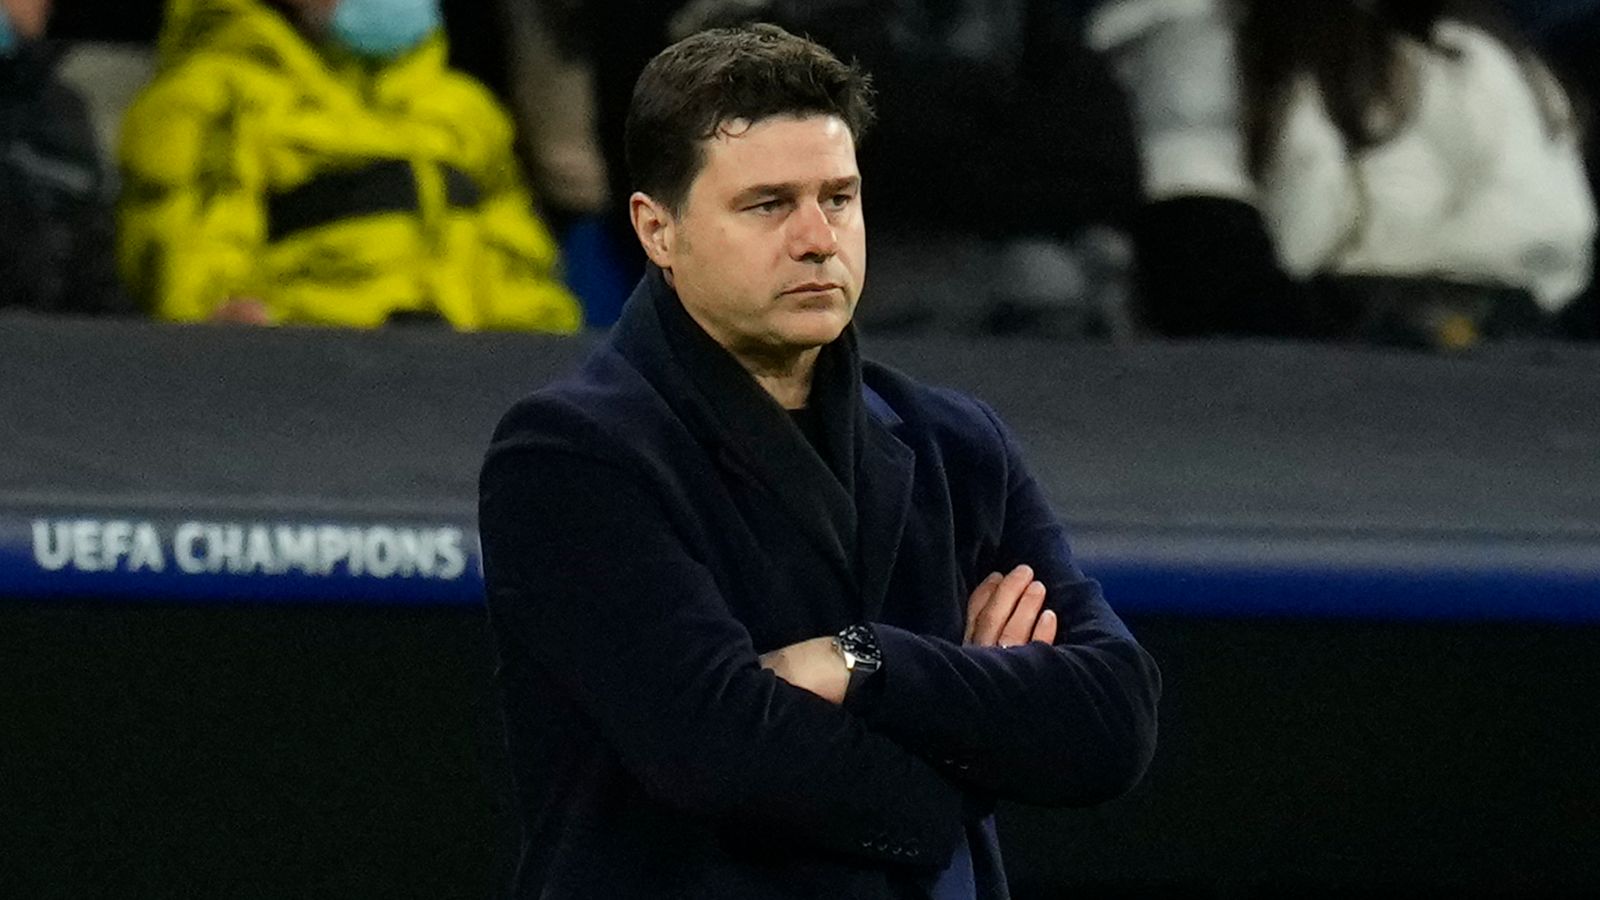 Mauricio Pochettino: PSG finalising former Spurs boss' exit from the French champions - Sky Sports